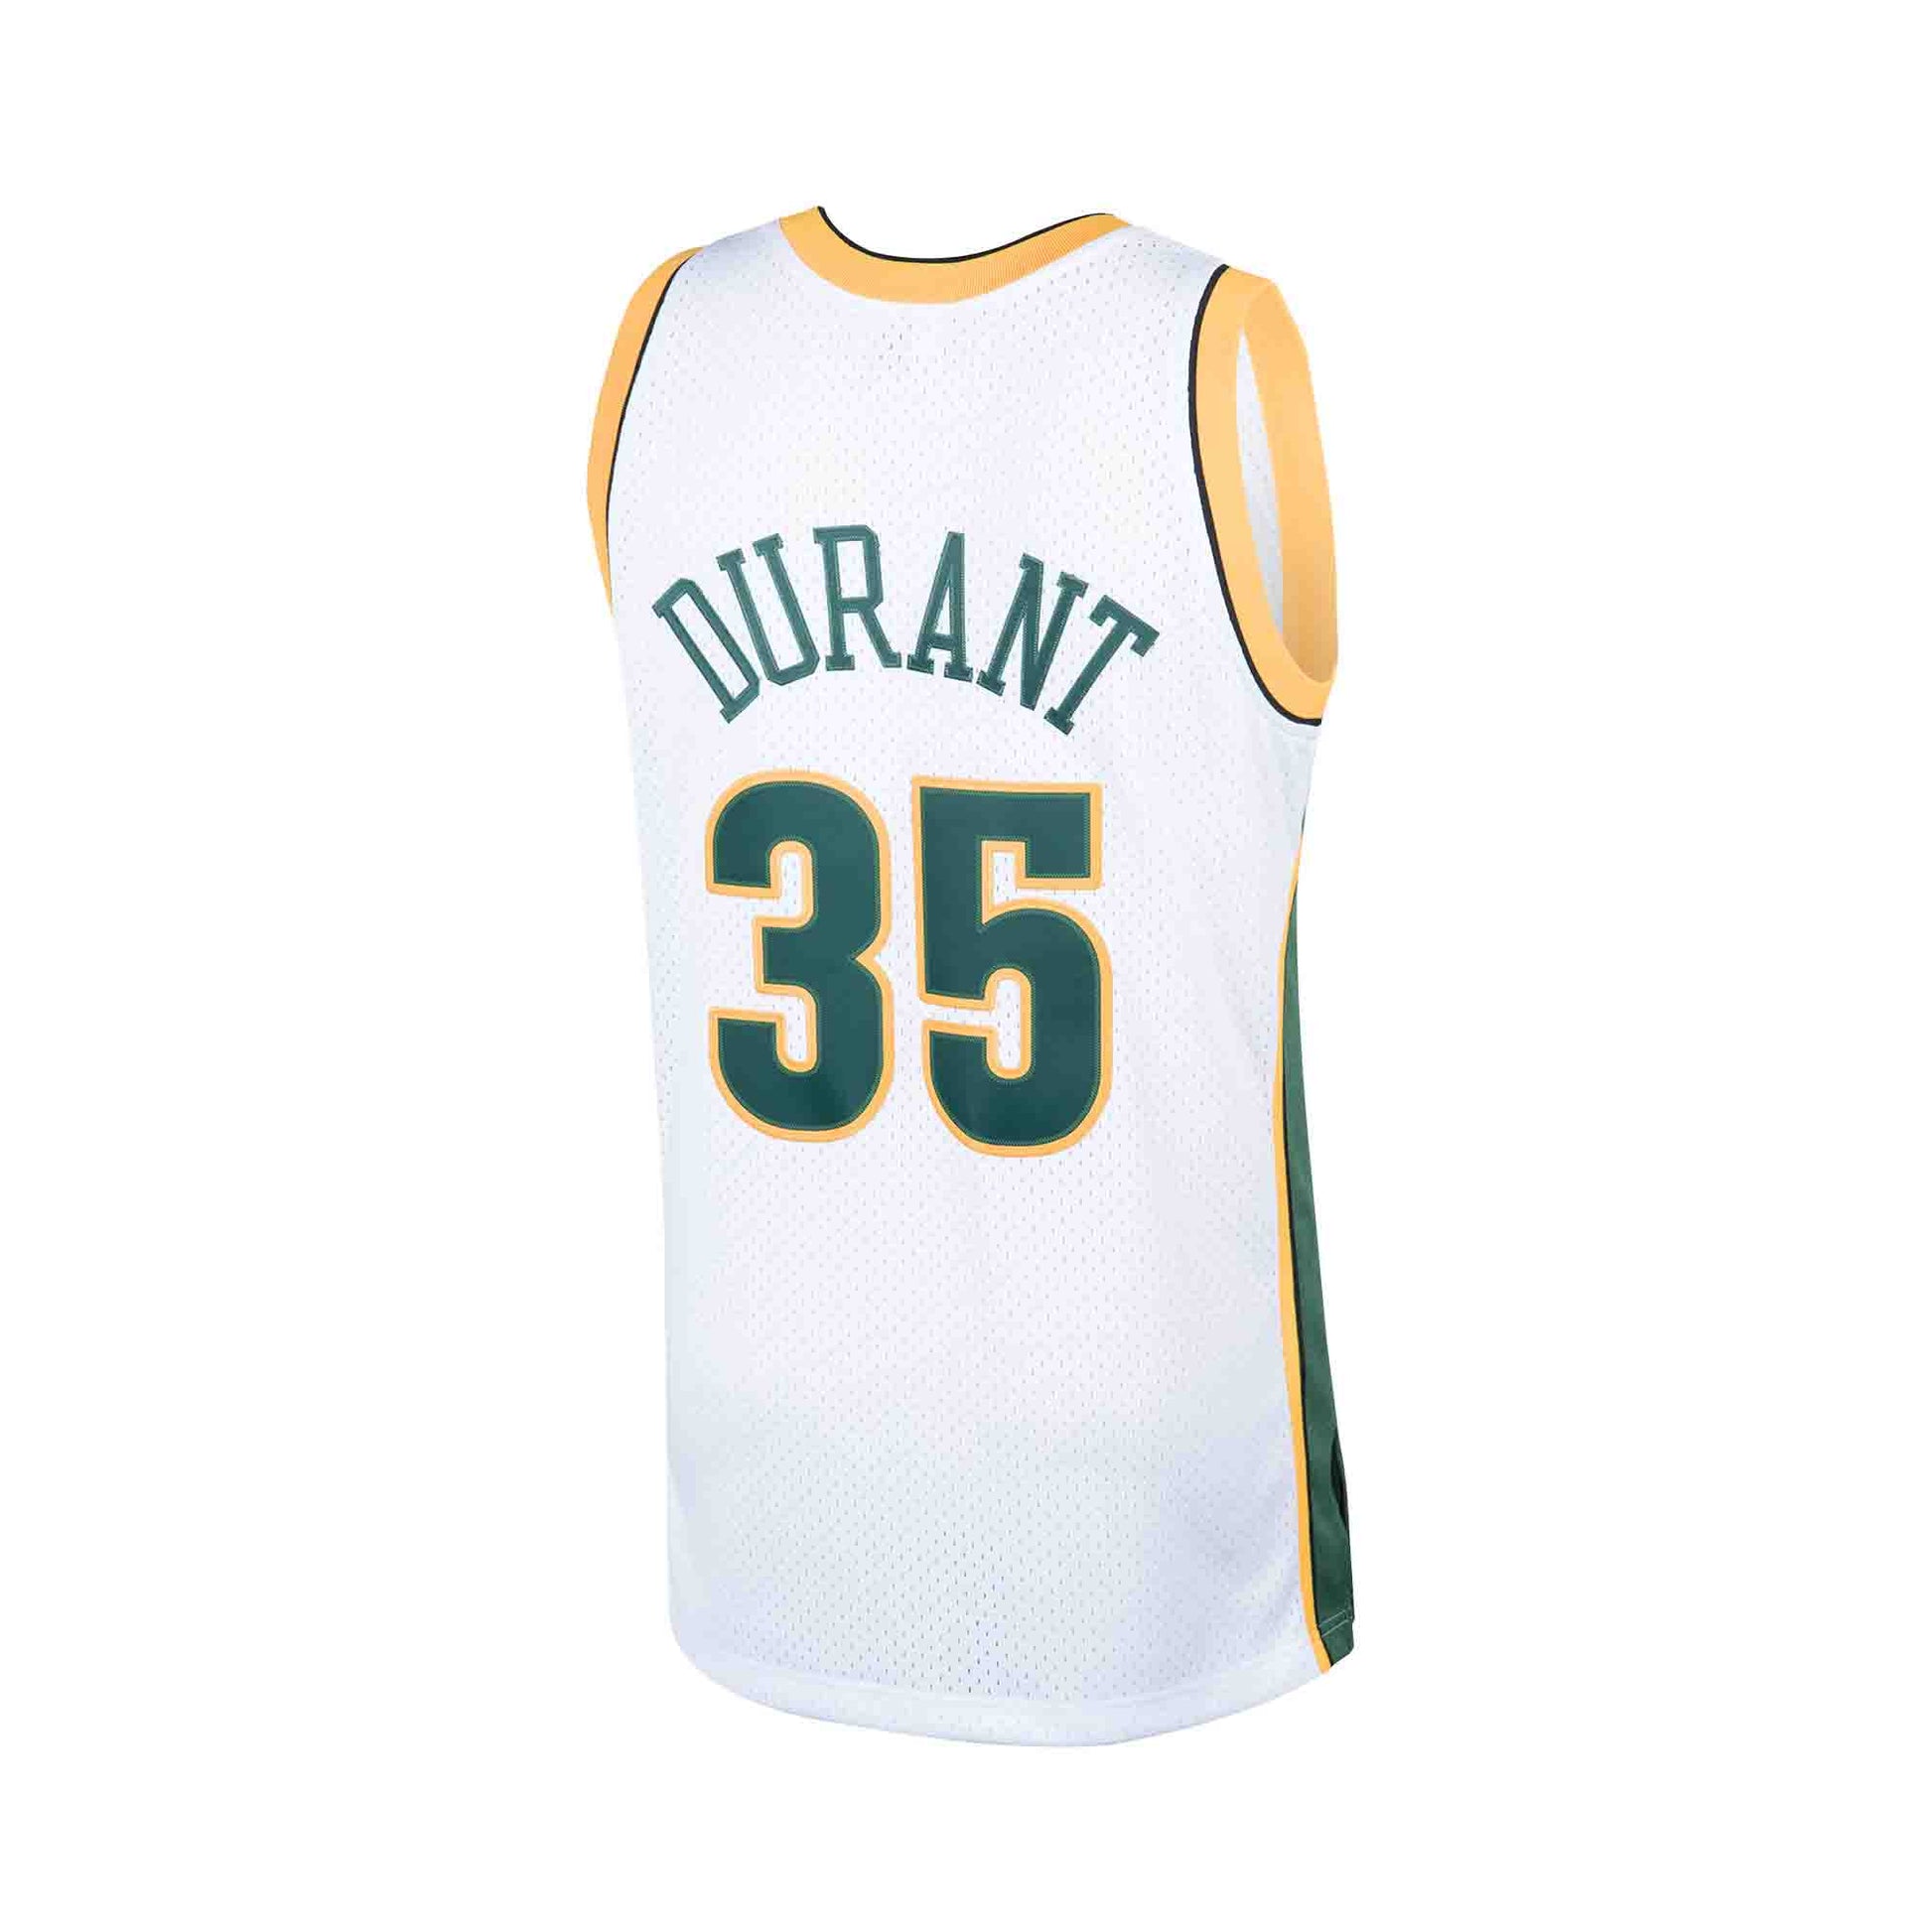 Kevin Durant Jersey, Kevin Durant Warriors Shirts, Apparel